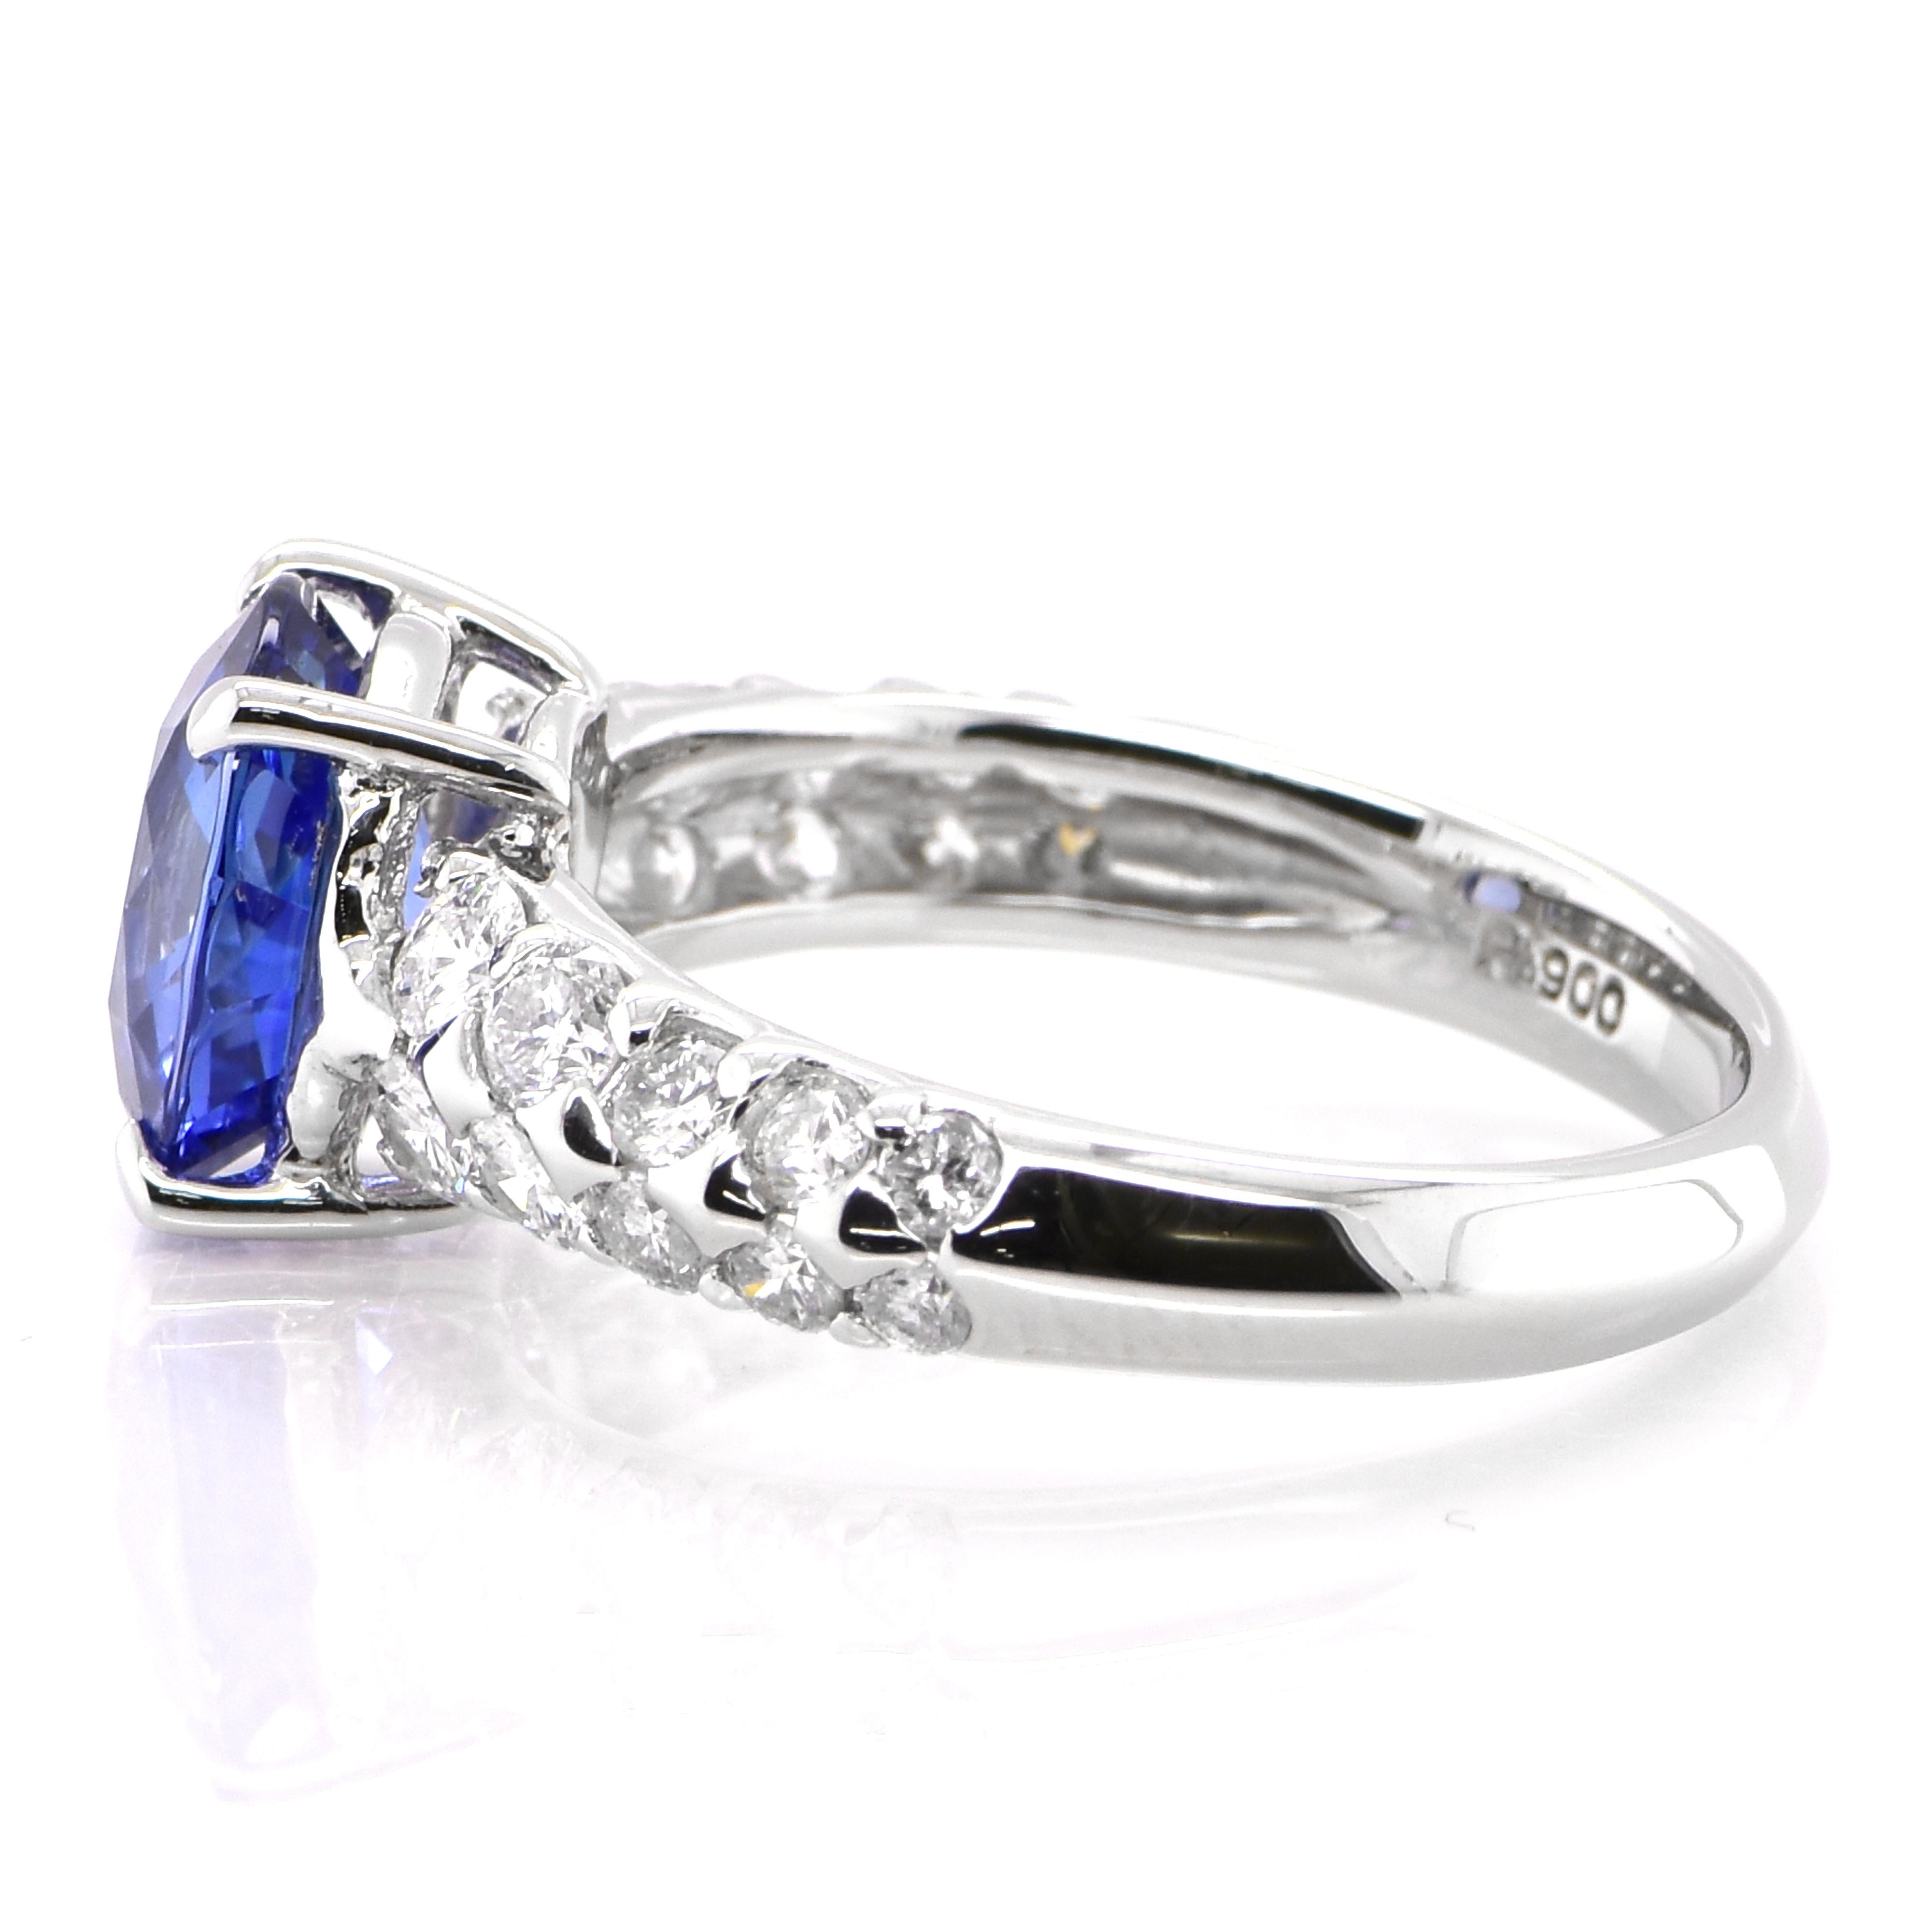 Oval Cut 2.17 Carat Natural 'Cornflower Blue' Sapphire and Diamond Made in Platinum For Sale